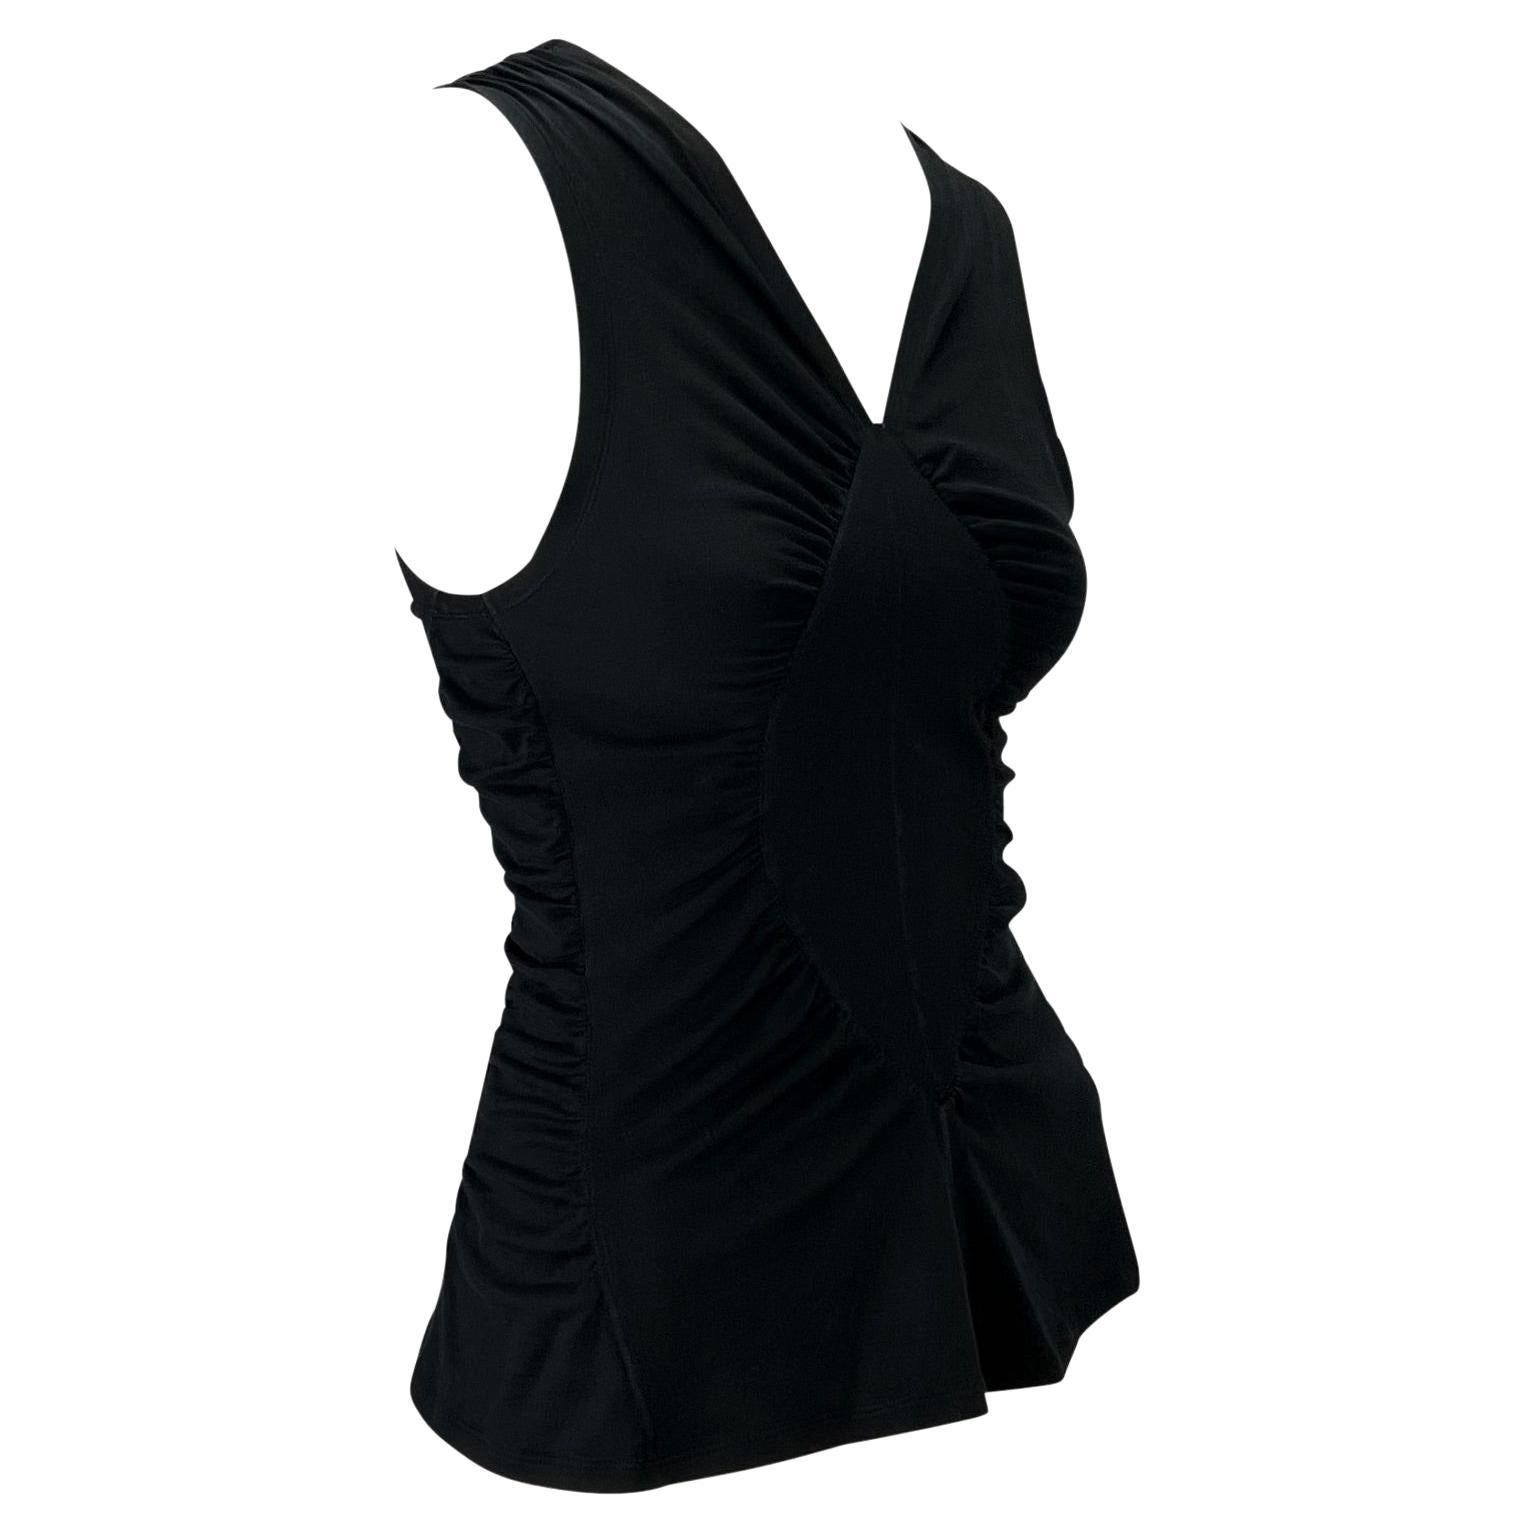 S/S 2003 Yves Saint Laurent by Tom Ford Black Ruched Cotton Tank Top For Sale 1